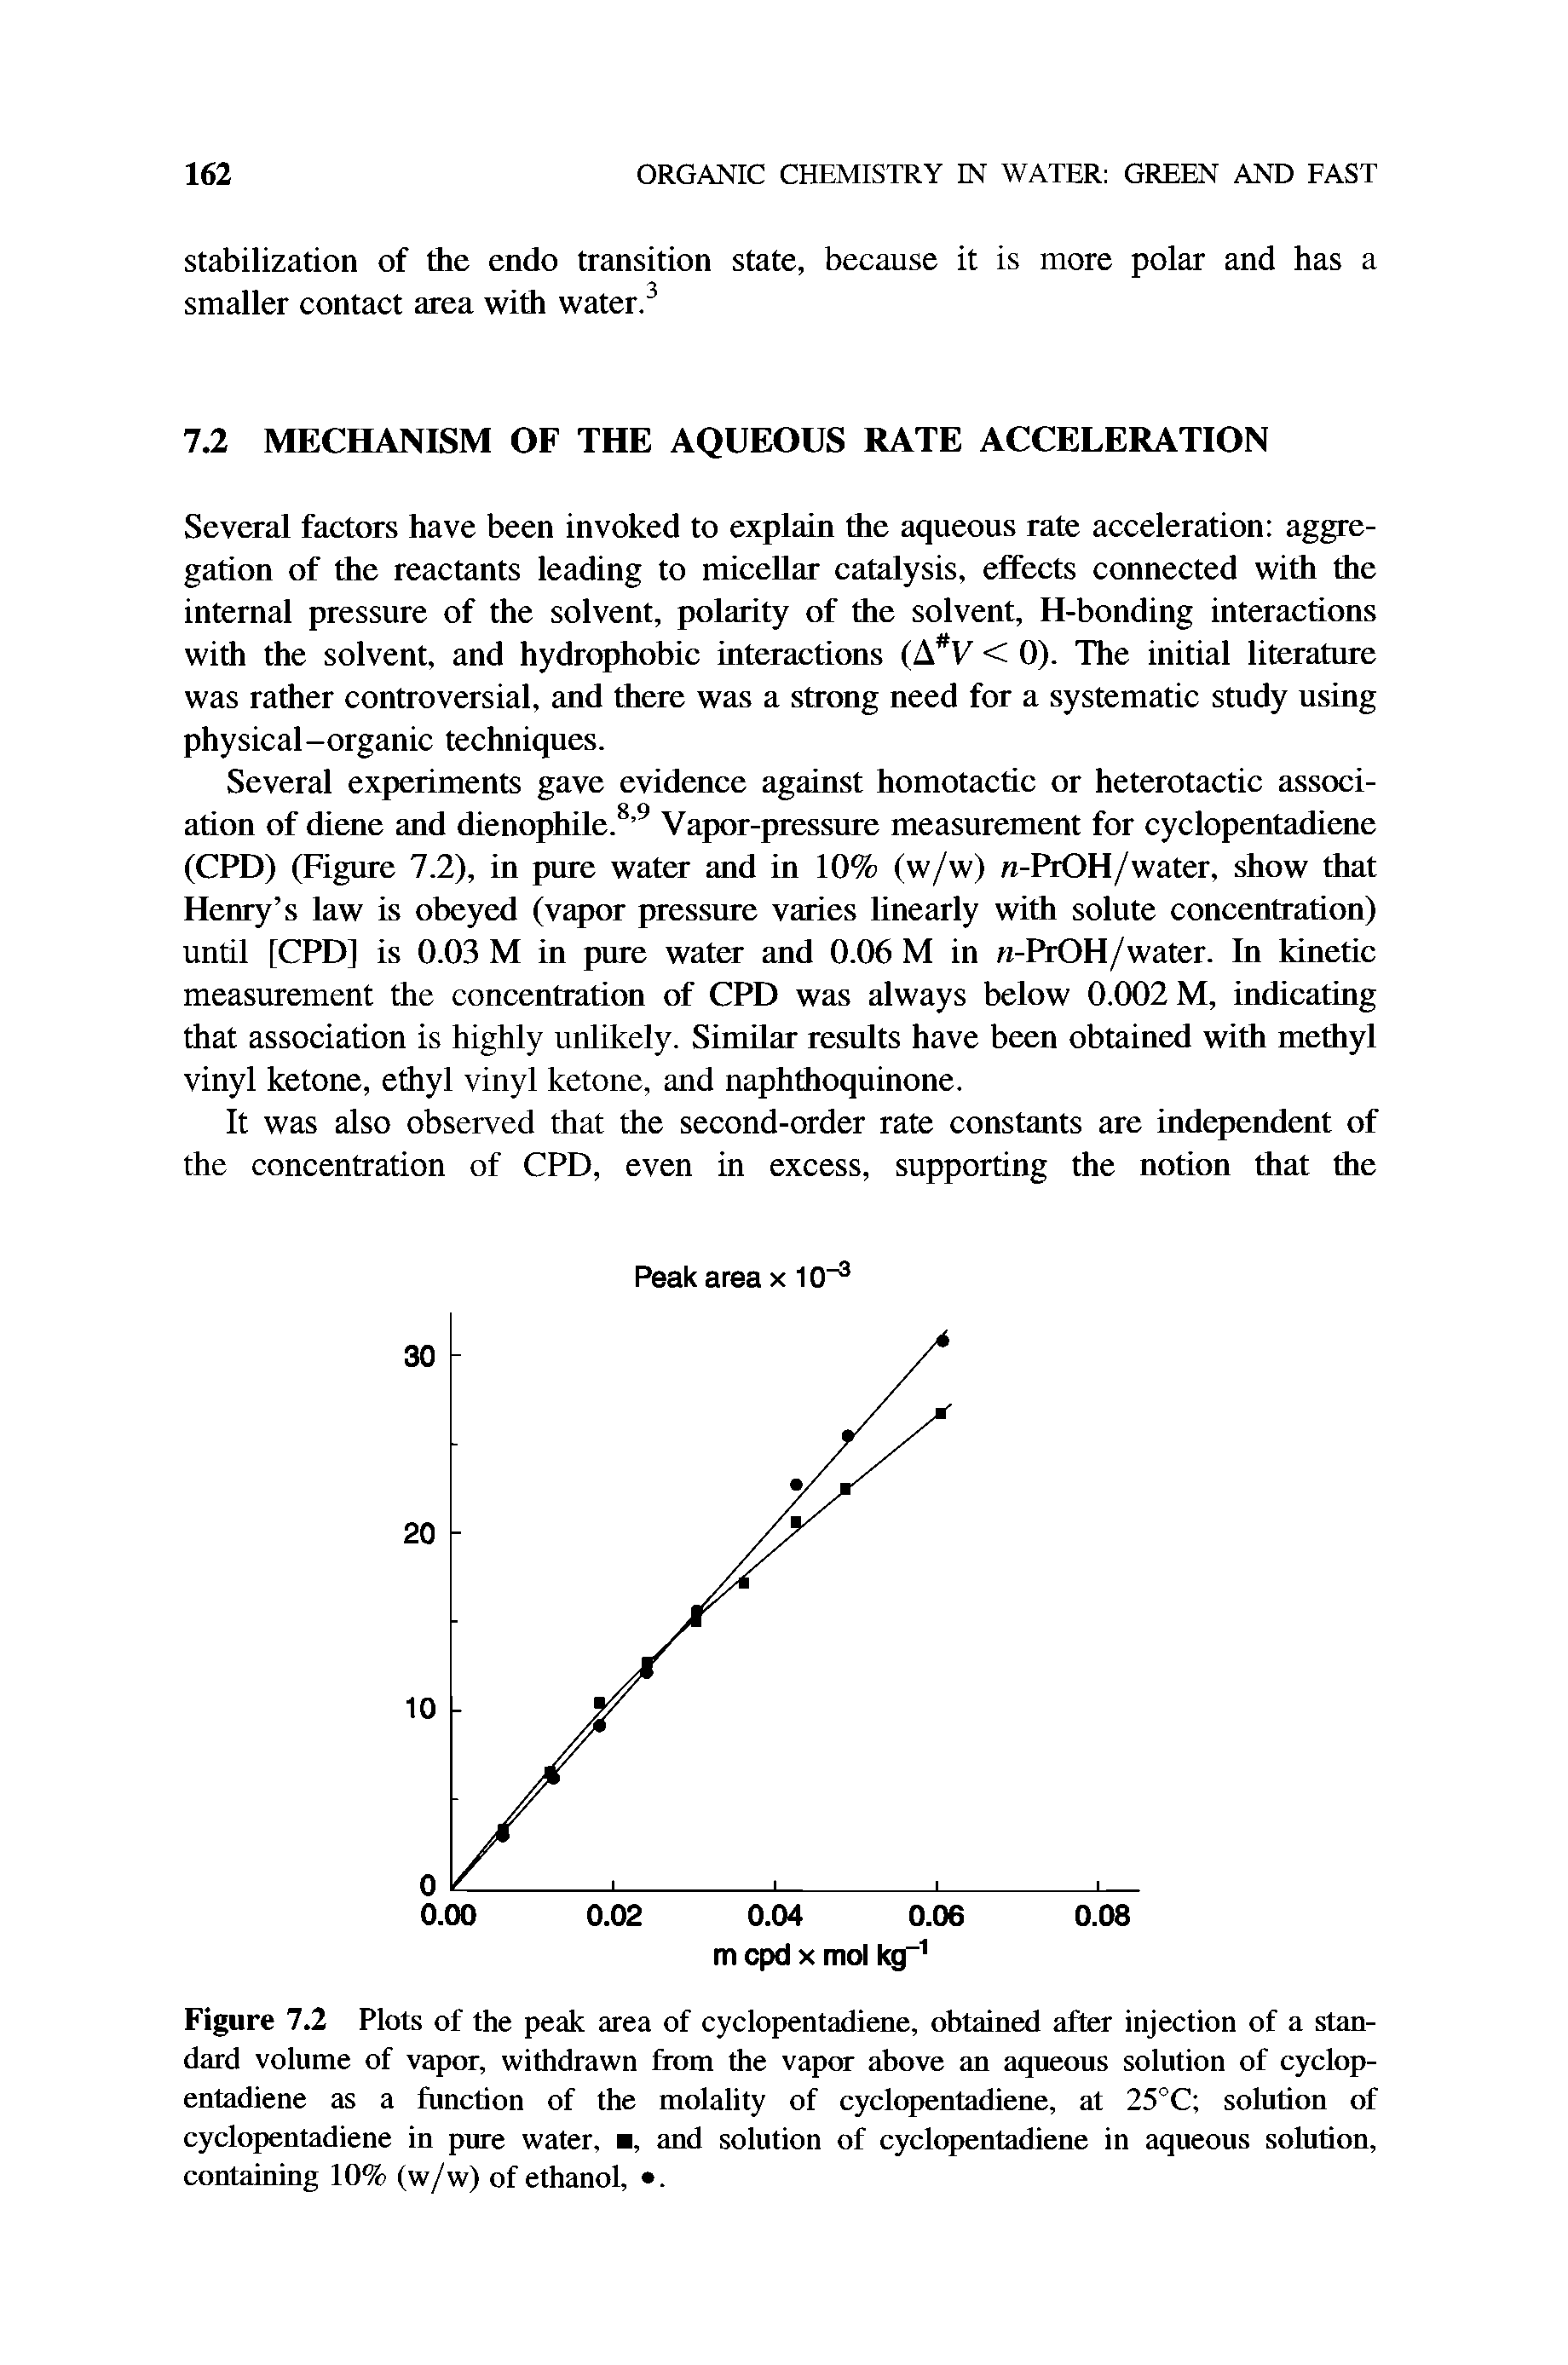 Figure 7.2 Plots of the peak area of cyclopentadiene, obtained after injection of a standard volume of vapor, withdrawn from the vapor above an aqueous solution of cyclopentadiene as a function of the molality of cyclopentadiene, at 25°C solution of cyclopentadiene in pure water, , and solution of cyclopentadiene in aqueous solution, containing 10% (w/w) of ethanol, .